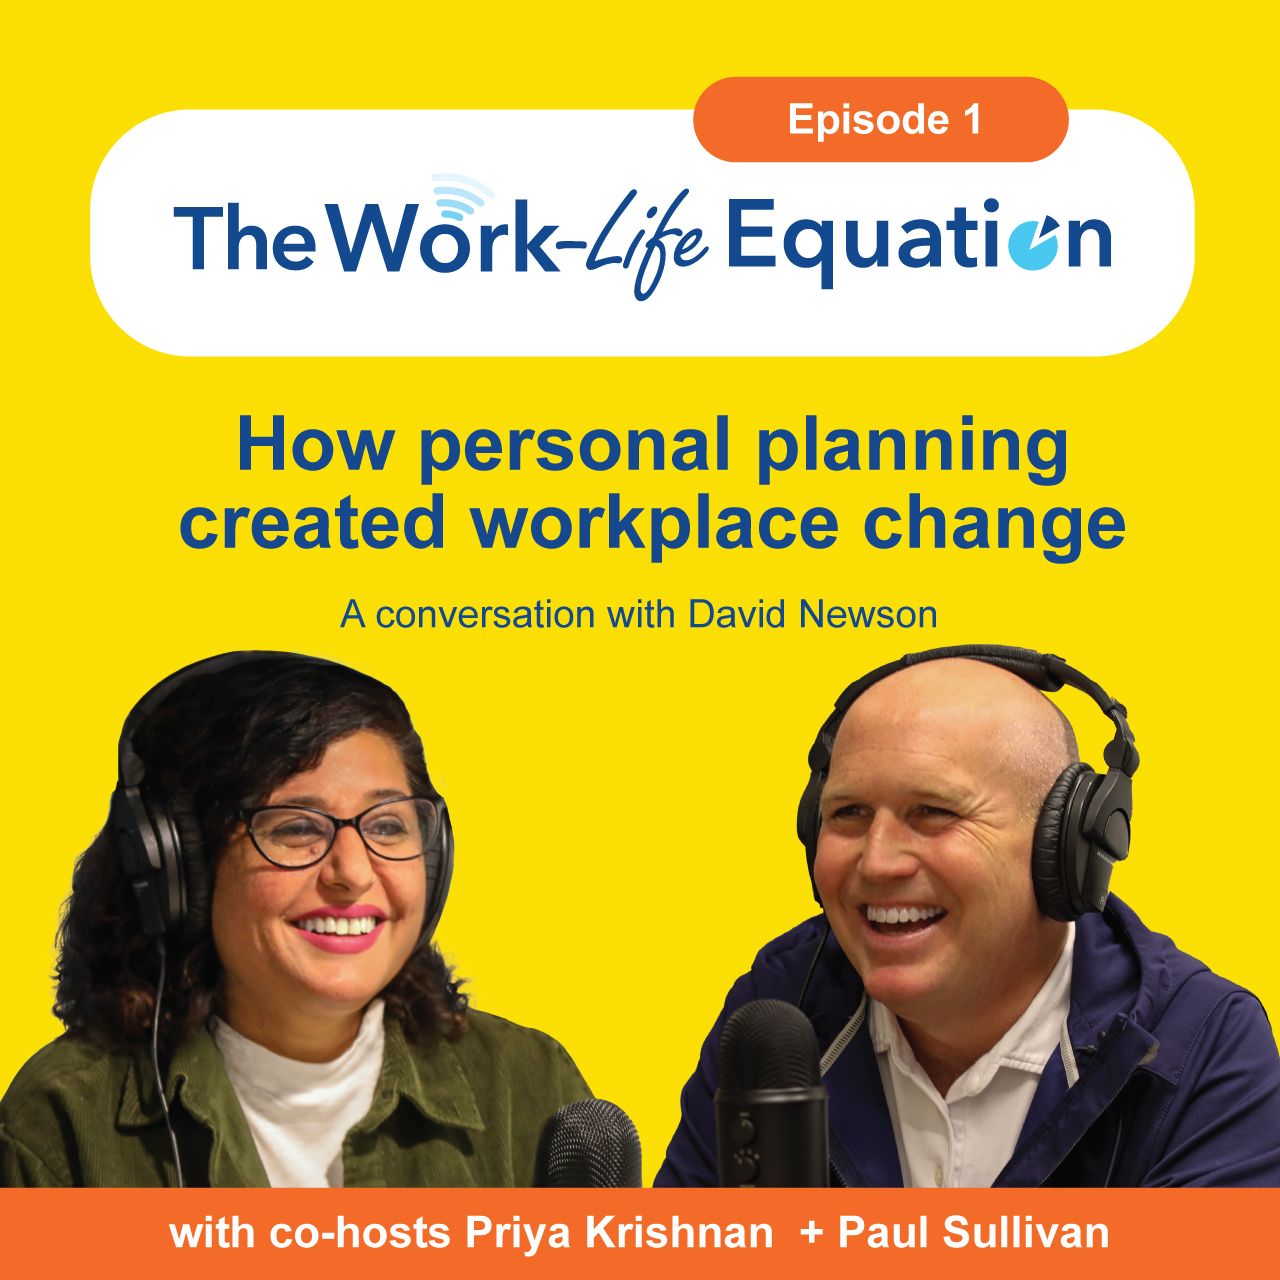 Episode 1 of Season 2 of the Work-Life Equation